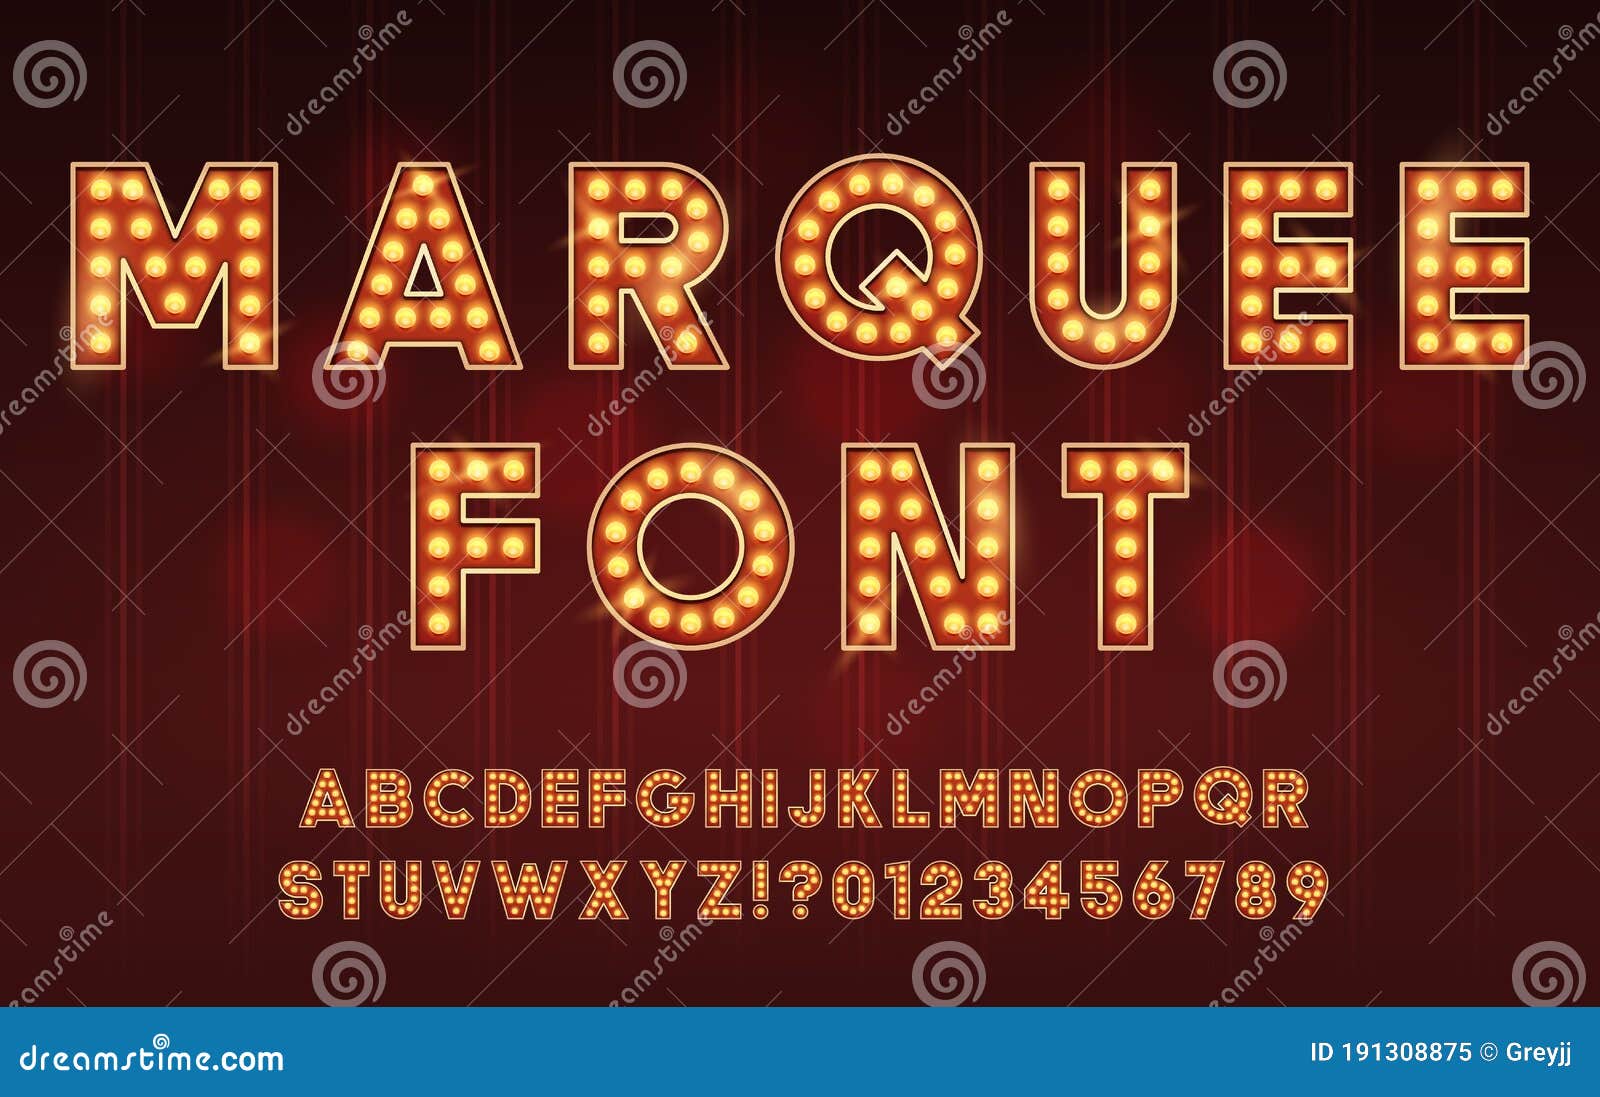 retro cinema or theater shows marquee font for dark background